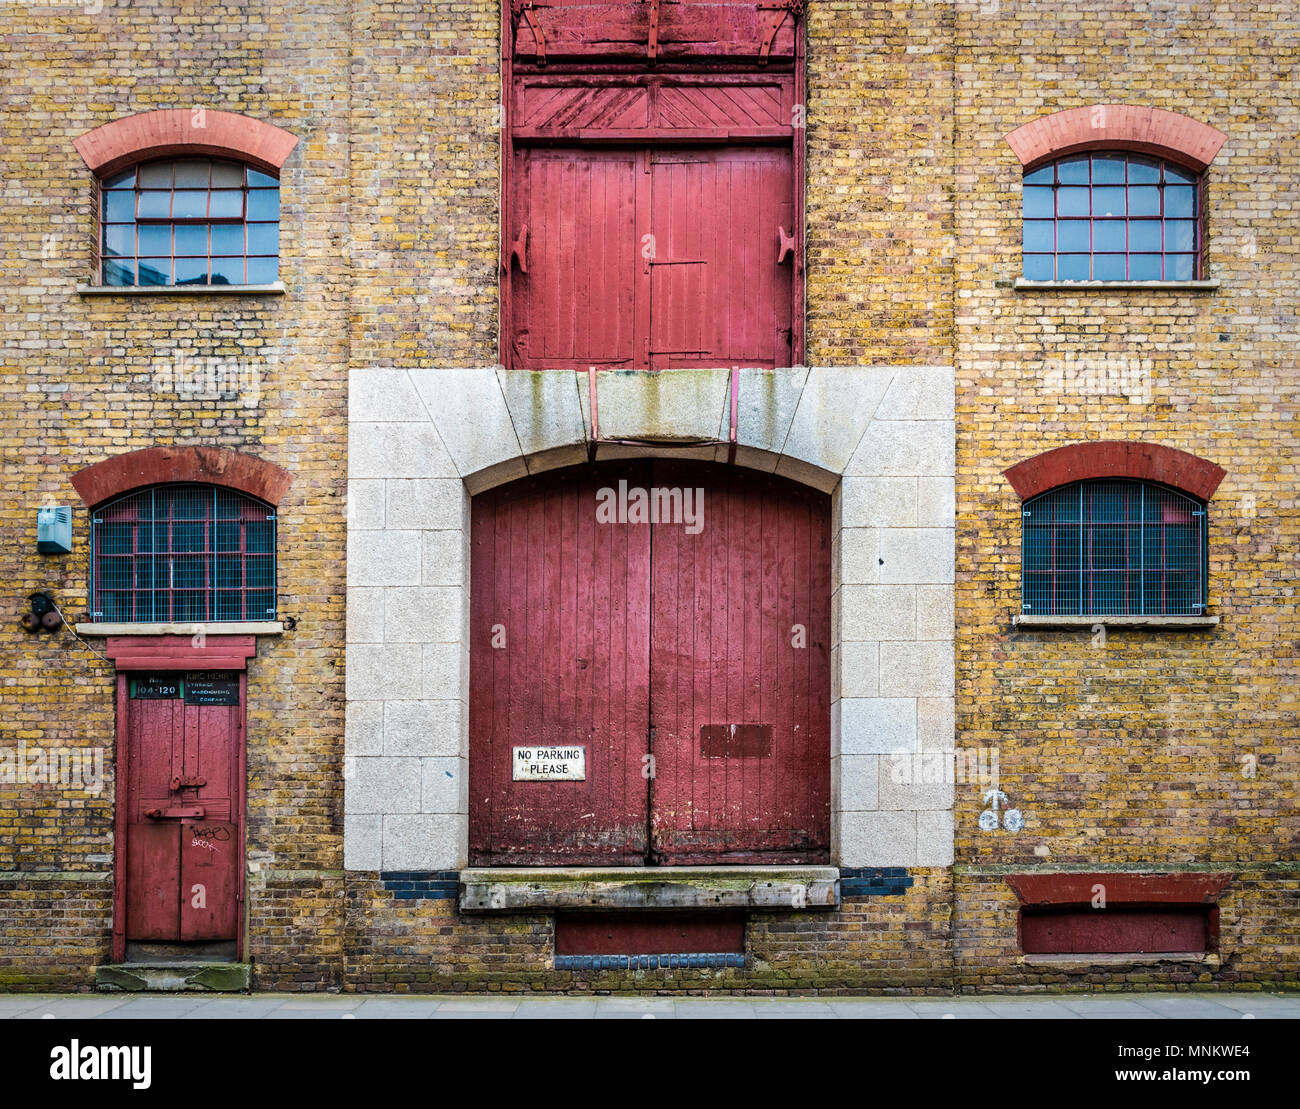 King Henry's Wharves, Grade II Listed Building in St Katharine's & Wapping, London, UK. Stock Photo